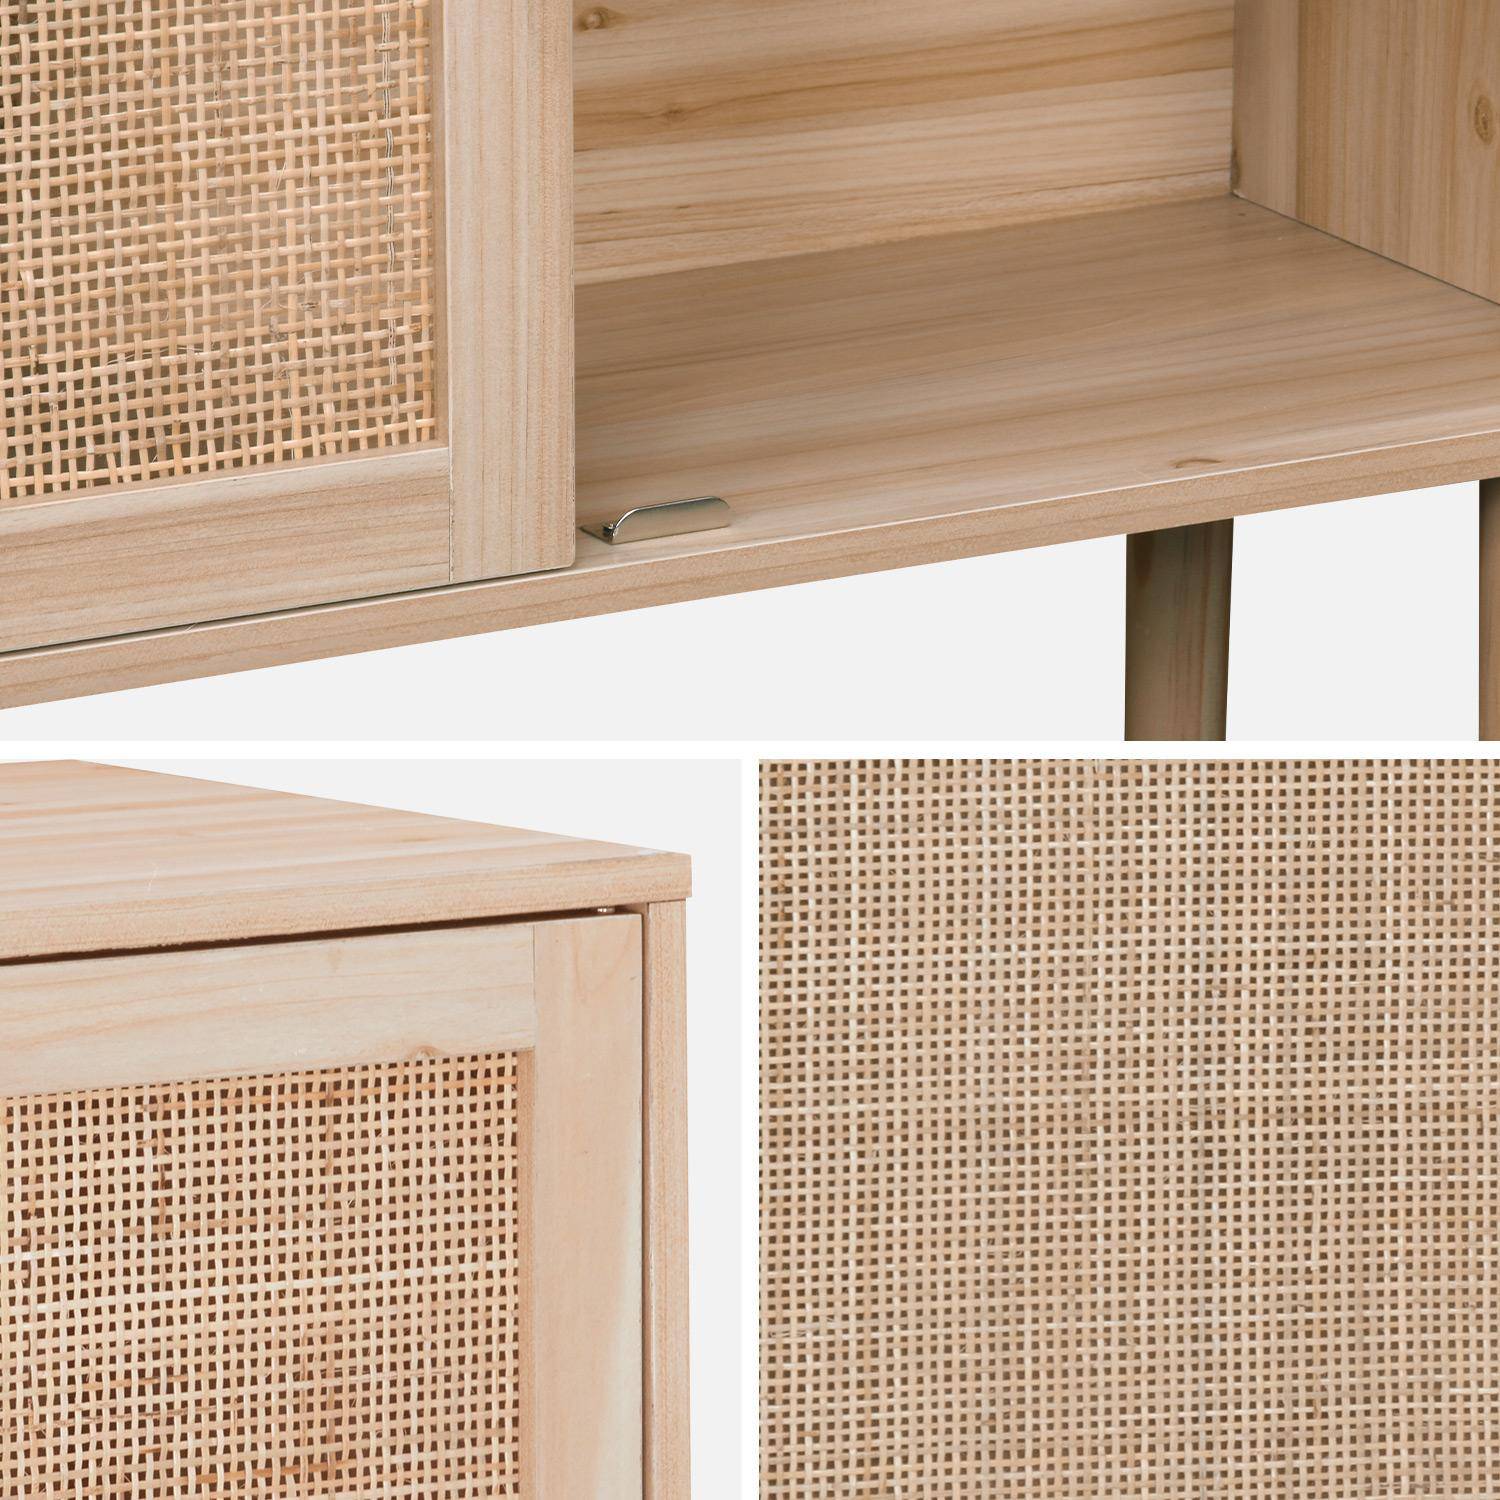 Wood and woven rattan 2-door storage cabinet with shelves, 80x30x68cm, Camargue, Natural Photo7